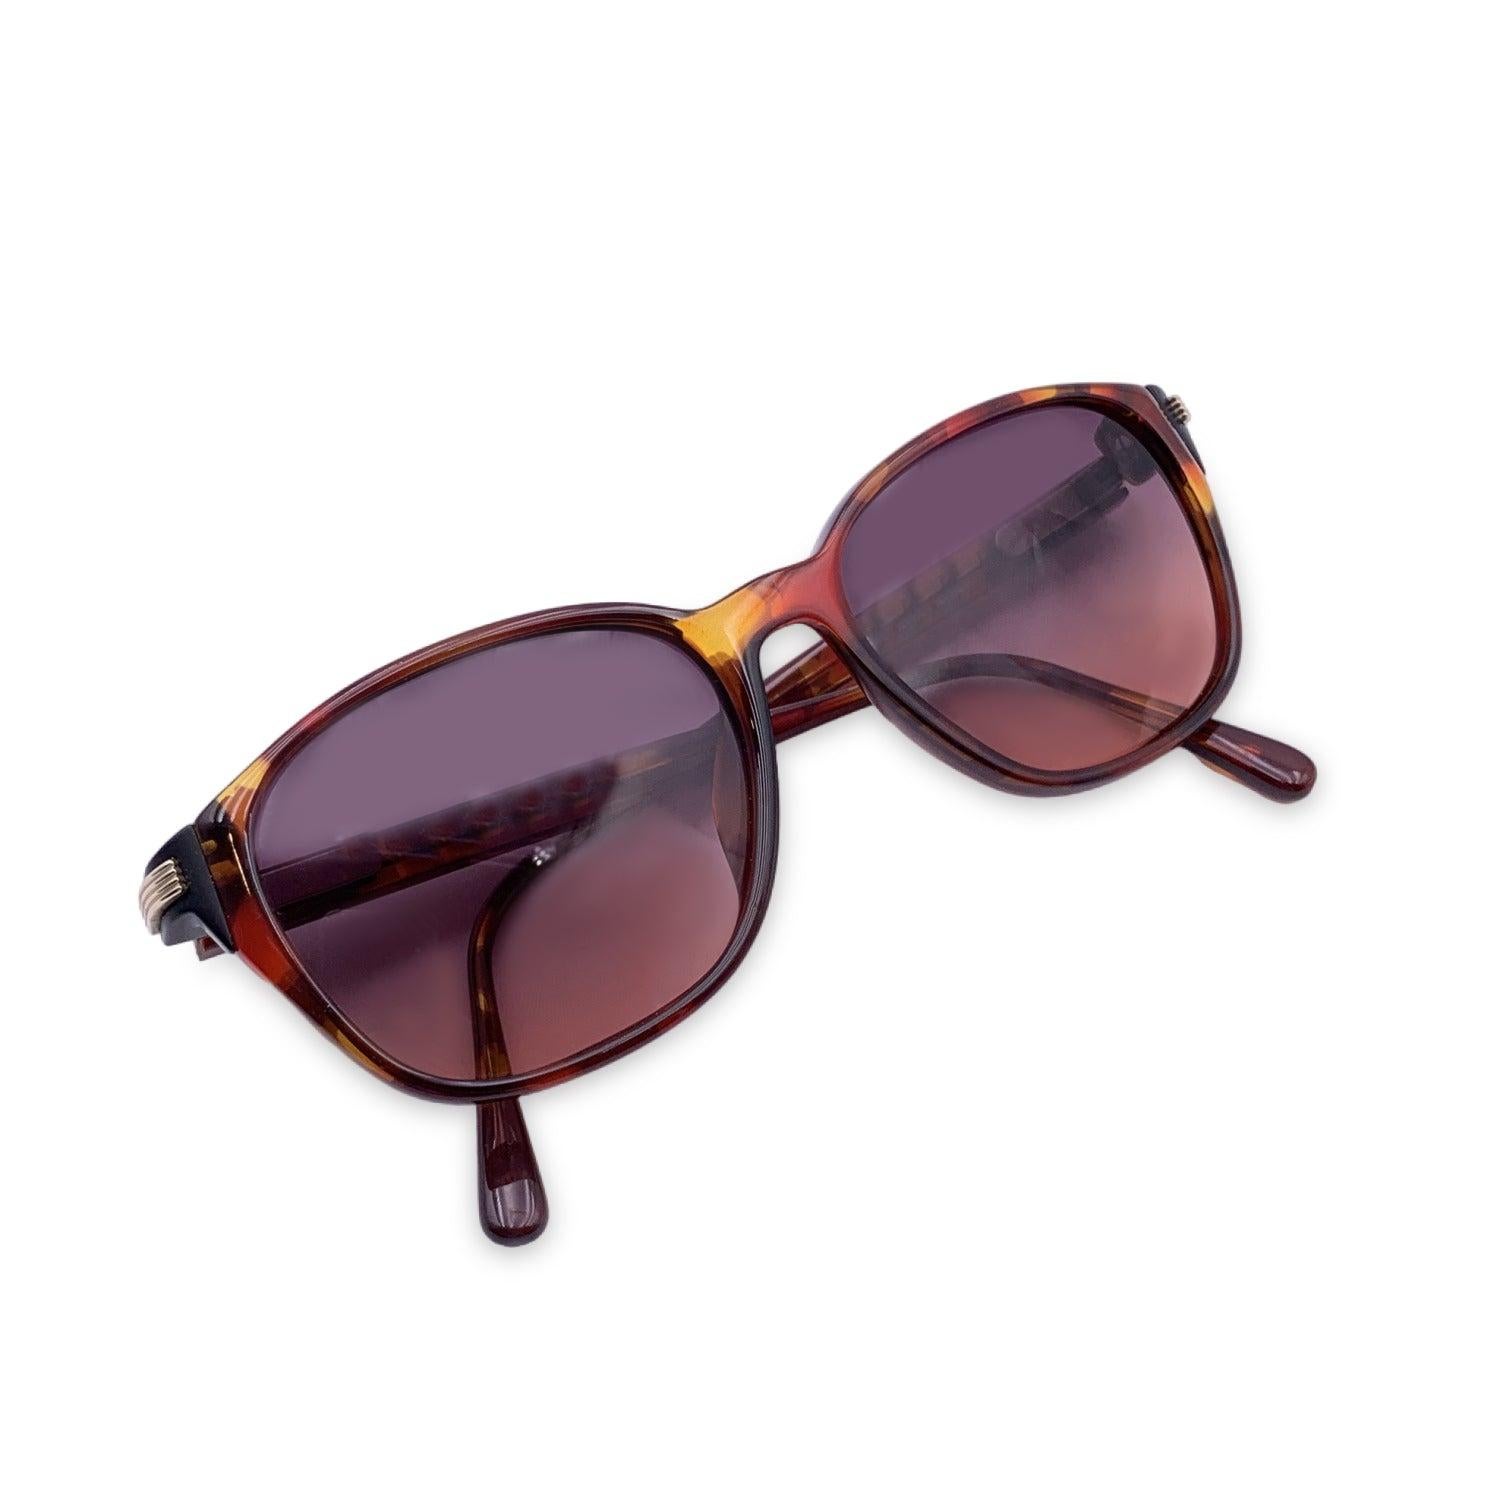 Vintage Christian Dior Women Sunglasses, Mod. 2719 30 Optyl. Size: 52/15 135mm. Brown acetate frame, with CD logo con temples . 100% Total UVA/UVB protection. From purple to pink gradient lenses. Details MATERIAL: Plastic COLOR: Brown MODEL: 2719